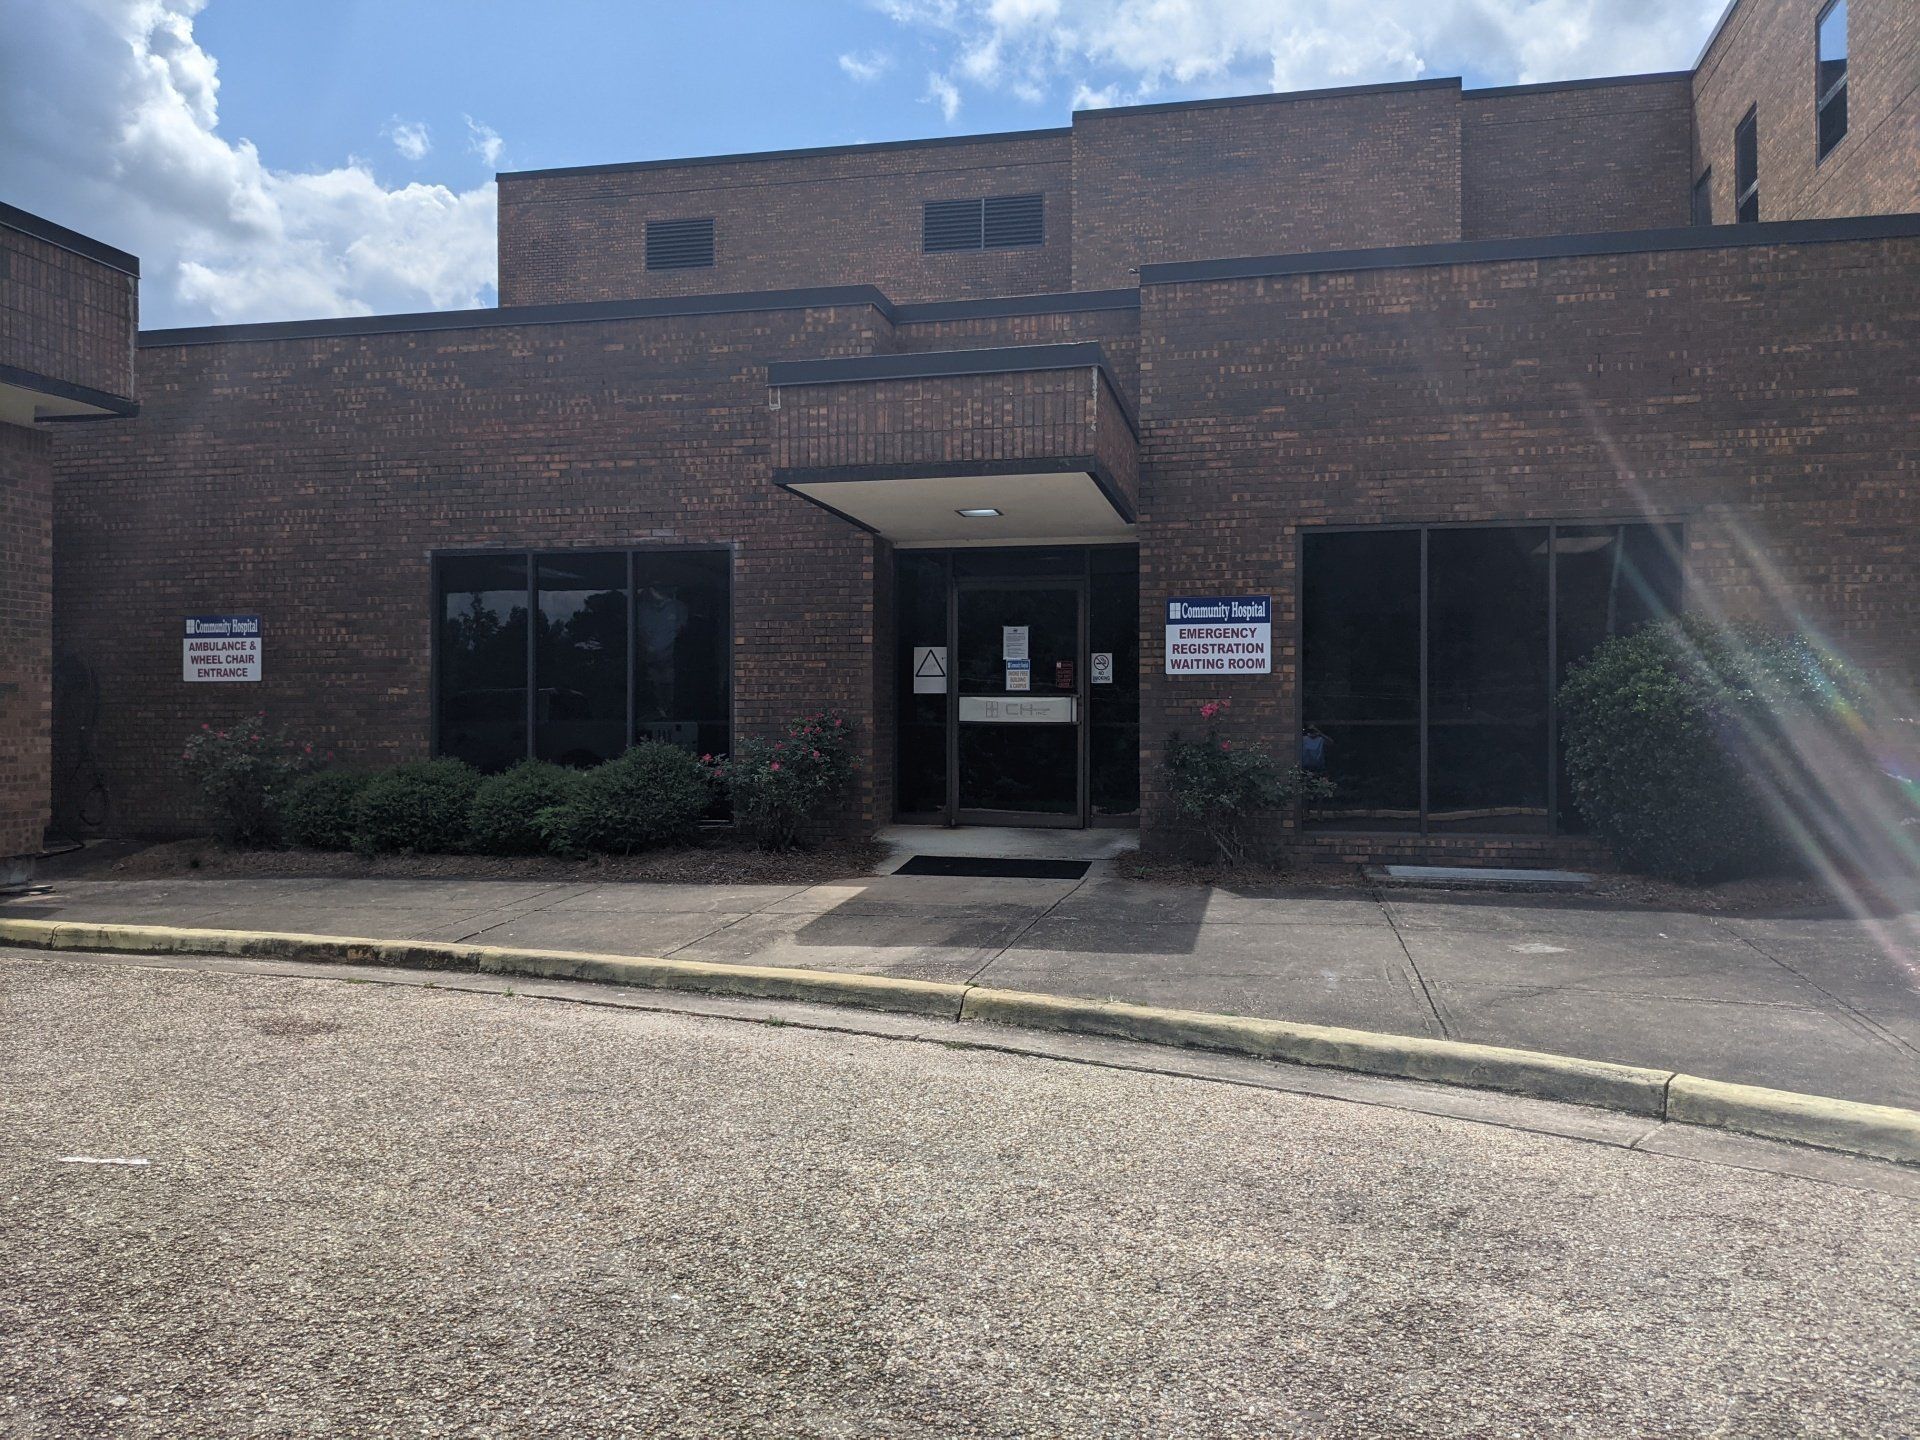 business storefront window tinting - Before Generic Tint Removal. The heat was coming in nearly full force making everyone miserable and energy costs high at Community Hospital in Tallassee, AL